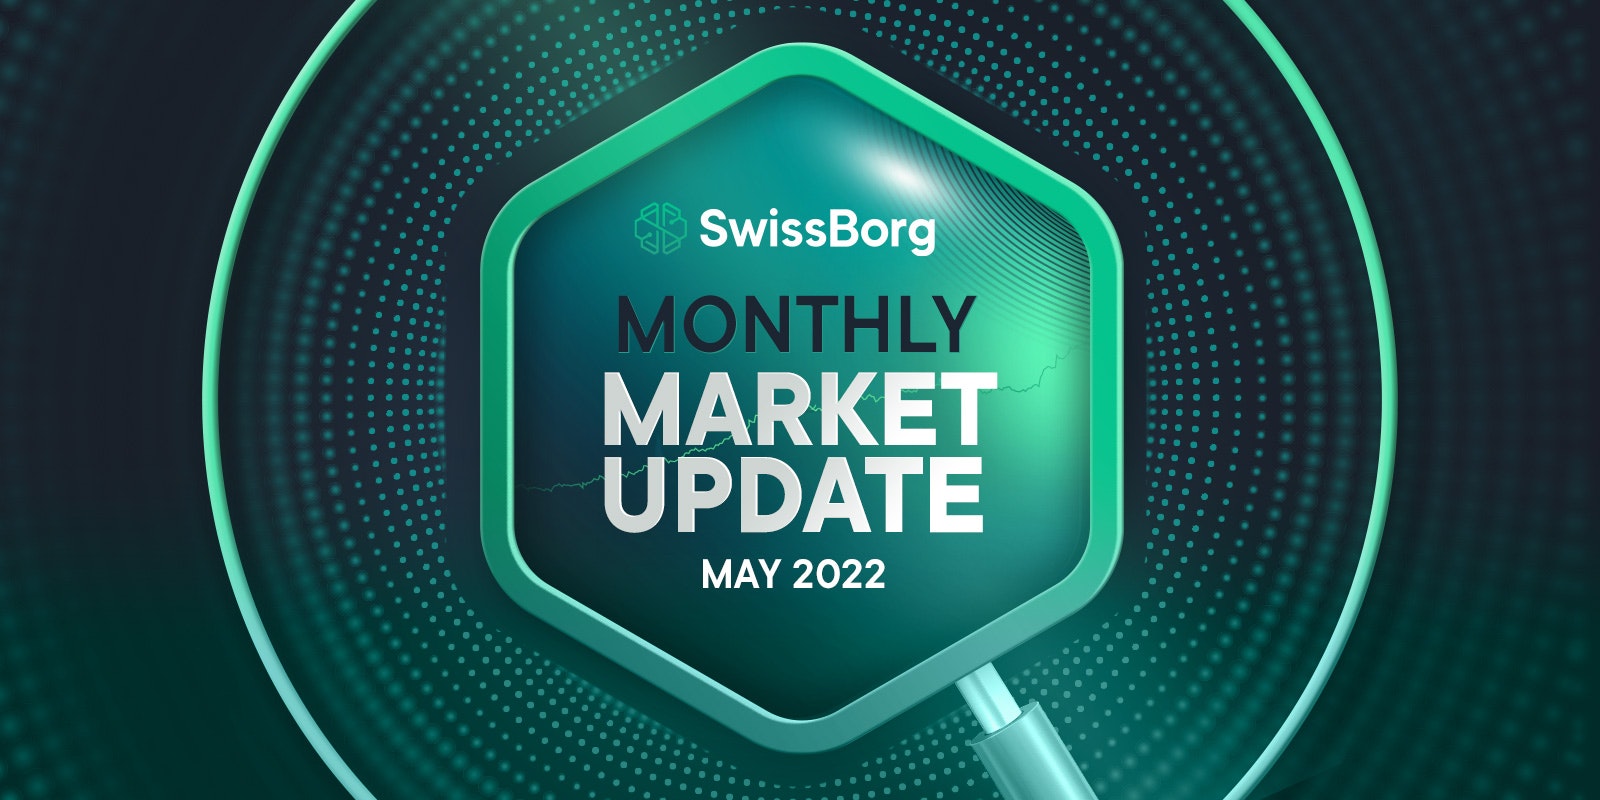 The SwissBorg Monthly Market Update May 2022